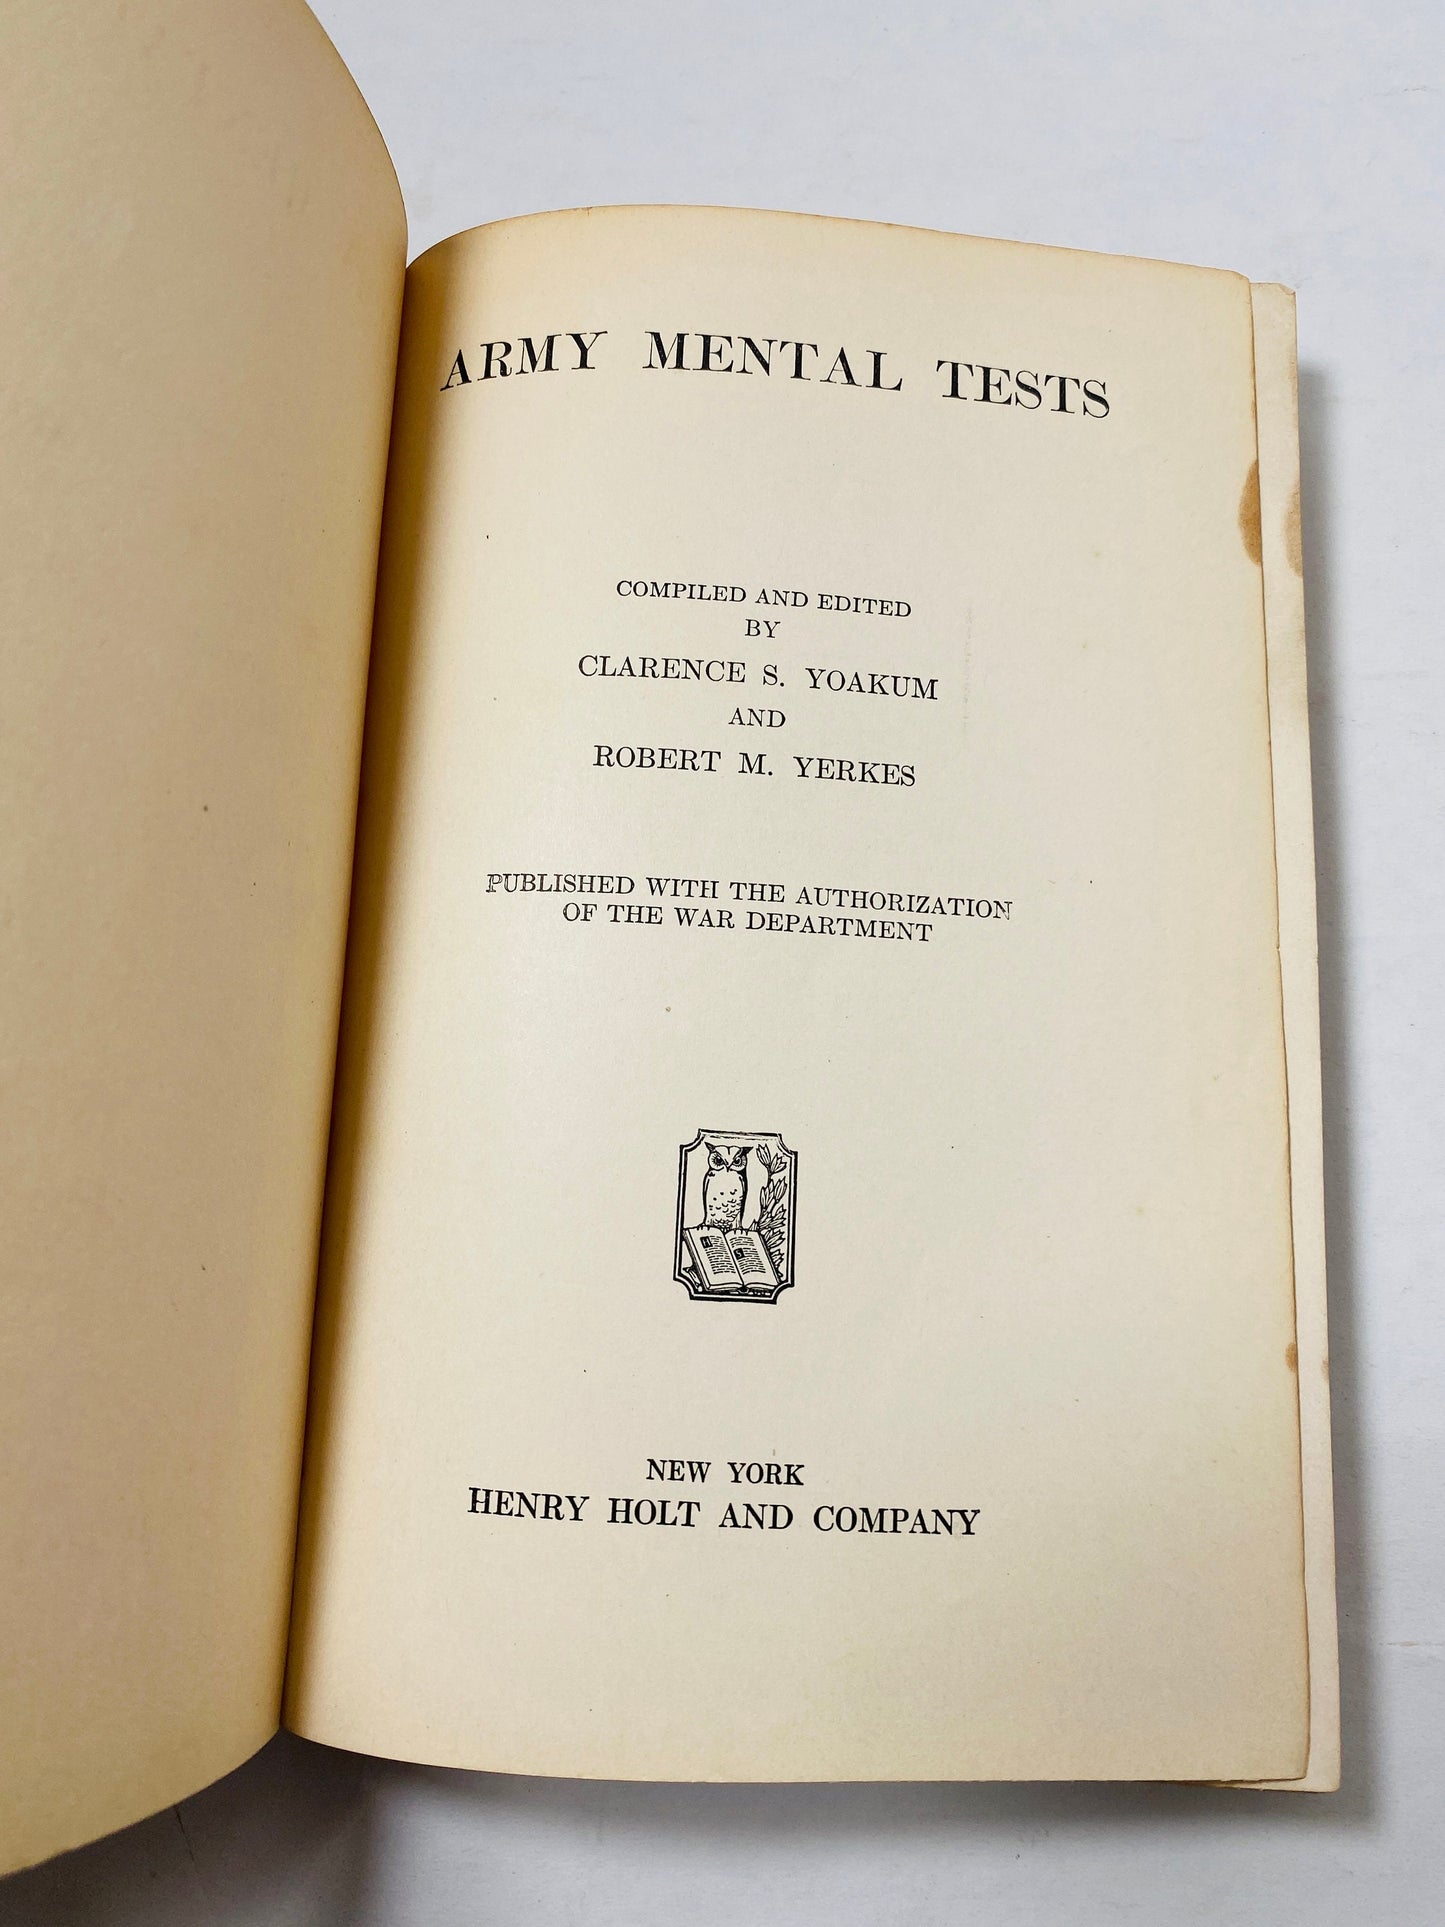 Army Intelligence antique book circa 1931 Government Mental Tests US War Department vintage rare collectible methodology psychology